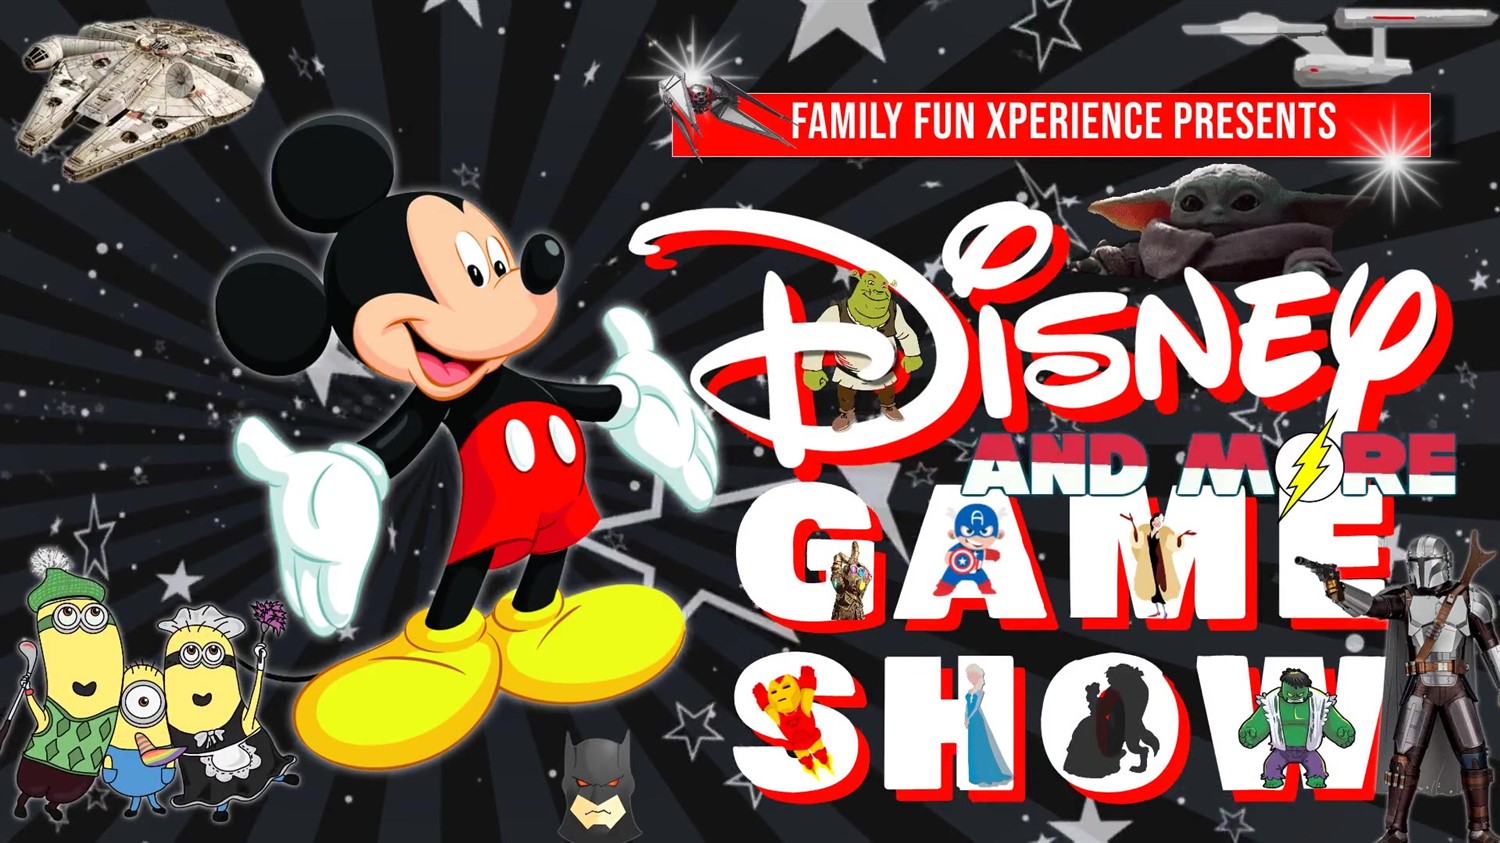 DISNEY & MORE GAME SHOW Animation, movies, sci-fi, superheroes, & much more! on ago. 16, 19:00@FFX Theatre - Pick a seat, Buy tickets and Get information on Family Fun Xperience tickets.ffxshow.org